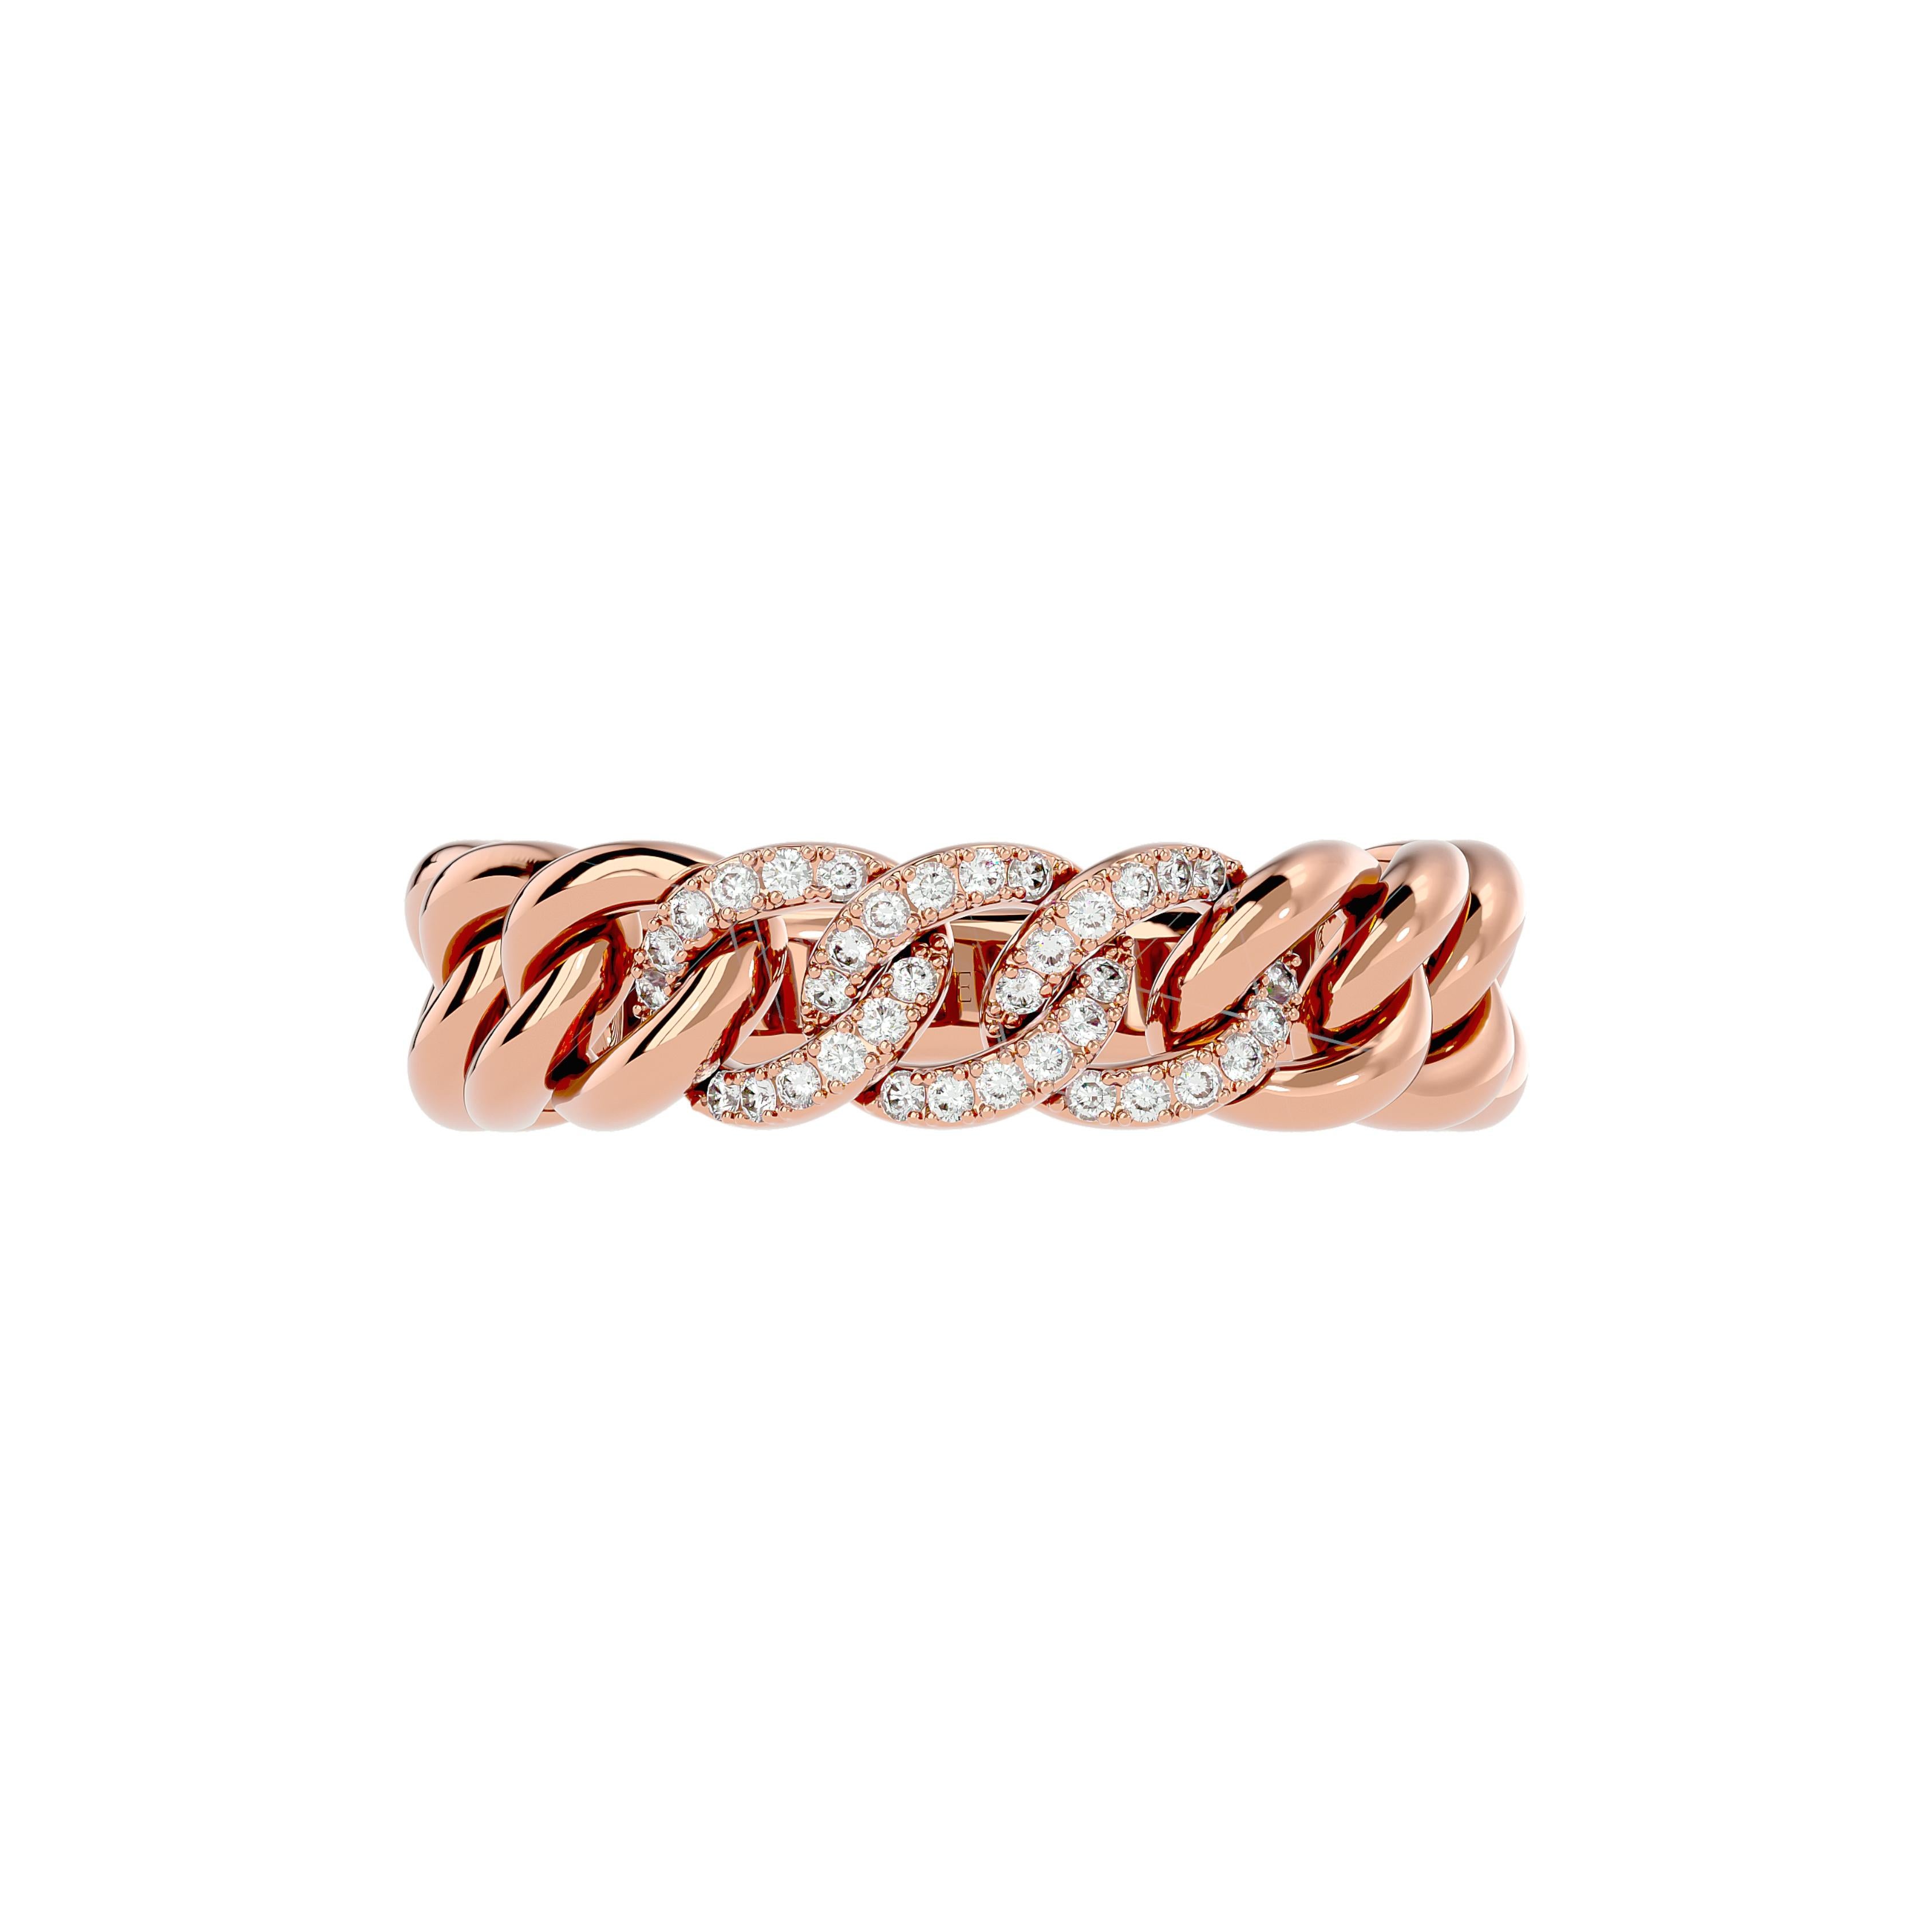 Elements
The Chain Diamond Ring is a modern take on a classic design. Handcrafted from gold and diamonds, this ring will add a touch of luxe to all of your looks.

Innovation
We all know that feeling of connection and brotherhood. The Chain ring is